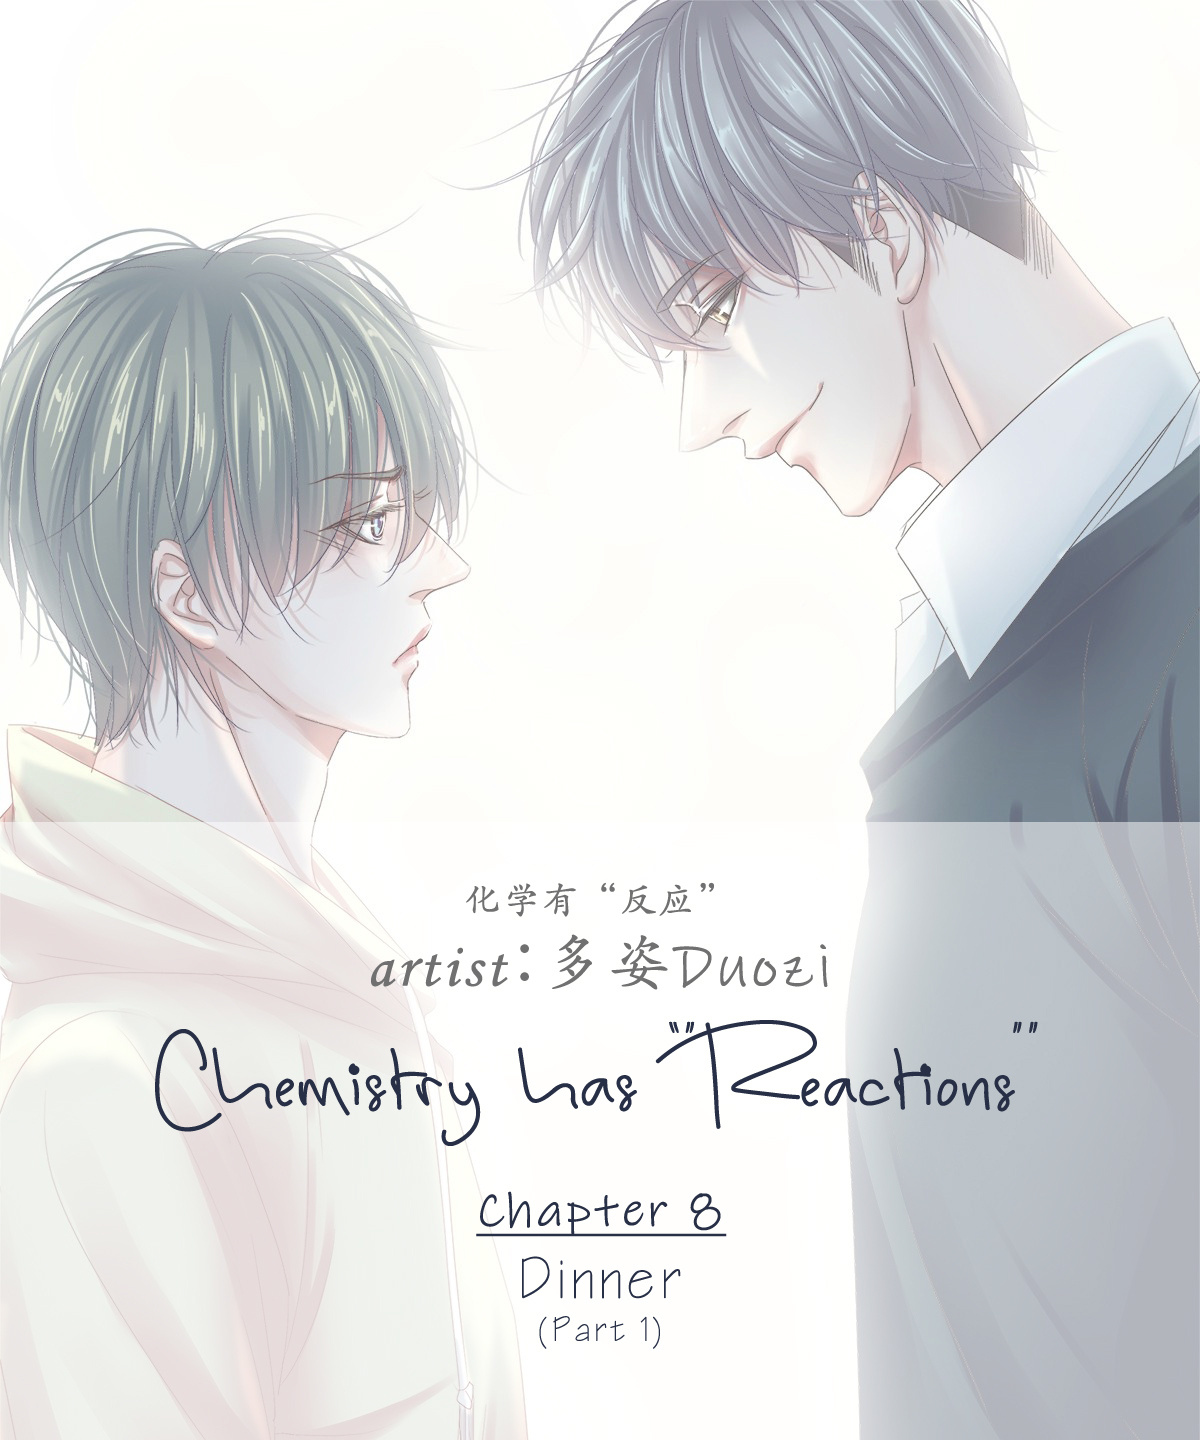 Chemistry Has "reactions" Chapter 8 #1